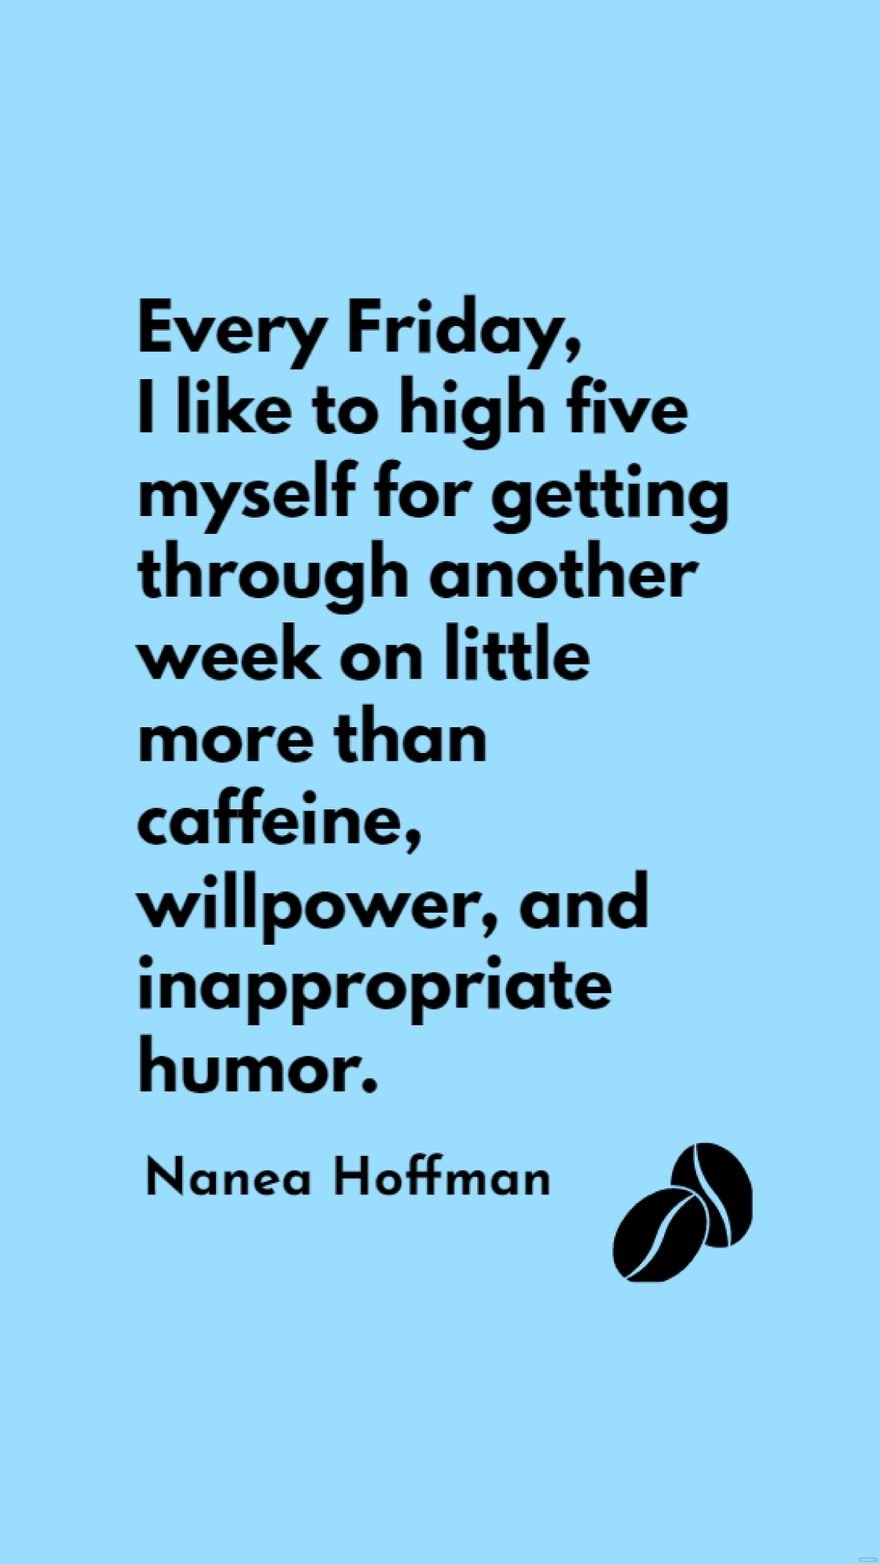 Nanea Hoffman - Every Friday, I like to high five myself for getting through another week on little more than caffeine, willpower, and inappropriate humor.